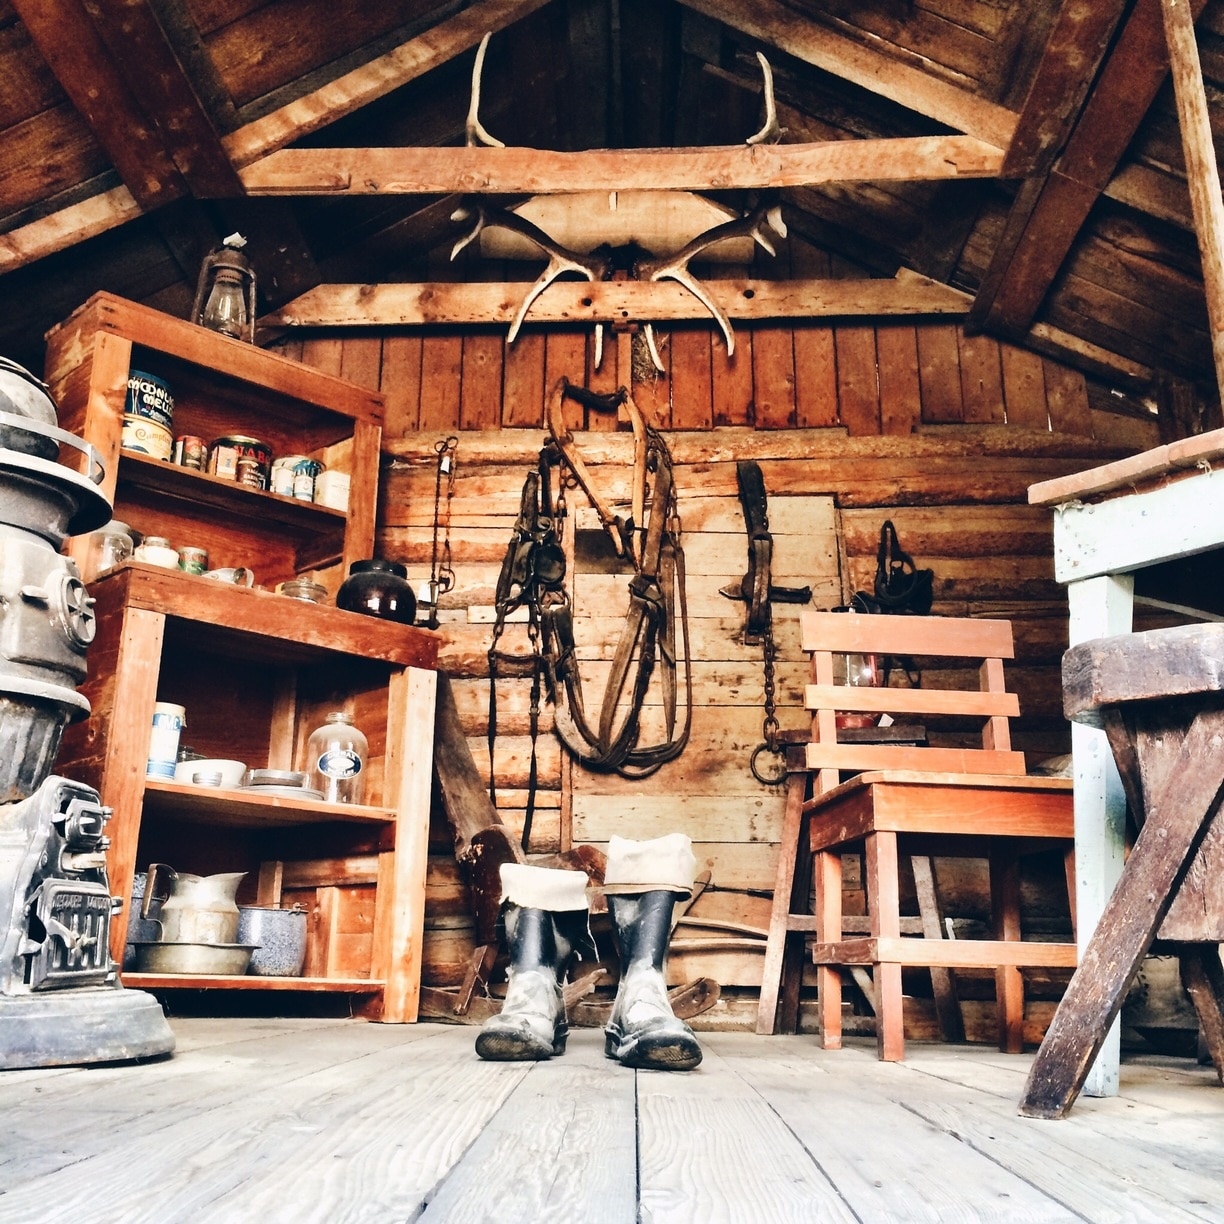 A peek inside Sam McGee's cabin at the McBride Museum in Whitehorse, Yukon. A fascinating peek into the Yukon's frontier days. 